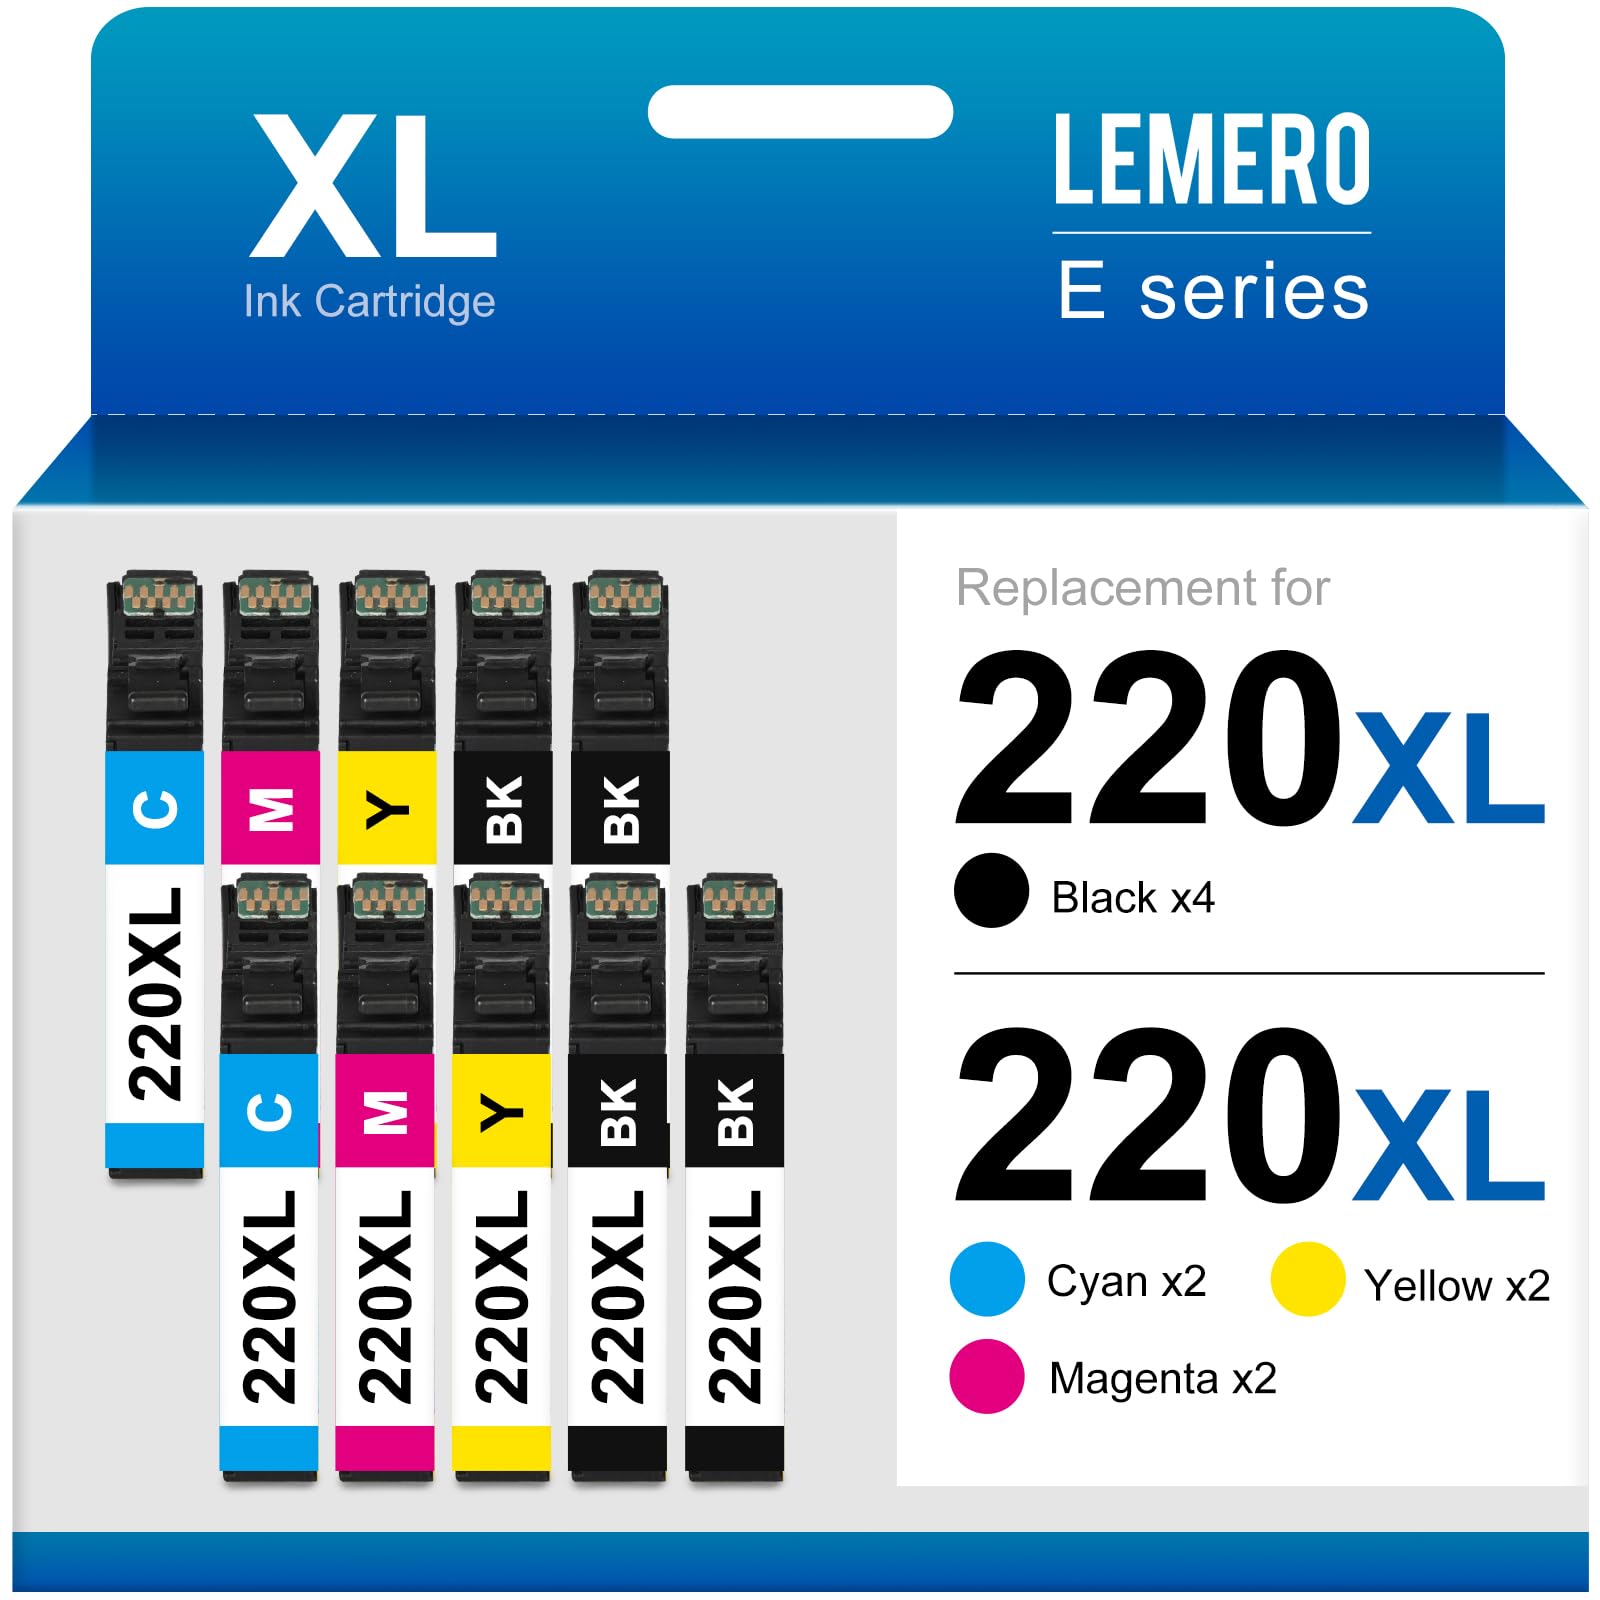 Pack of LEMERO 220XL High-Capacity Ink Cartridges, Compatible with Epson WF-2630, WF-2650, WF-2660, WF-2760, WF-2750, XP-320, XP-420, XP-424 Printers.